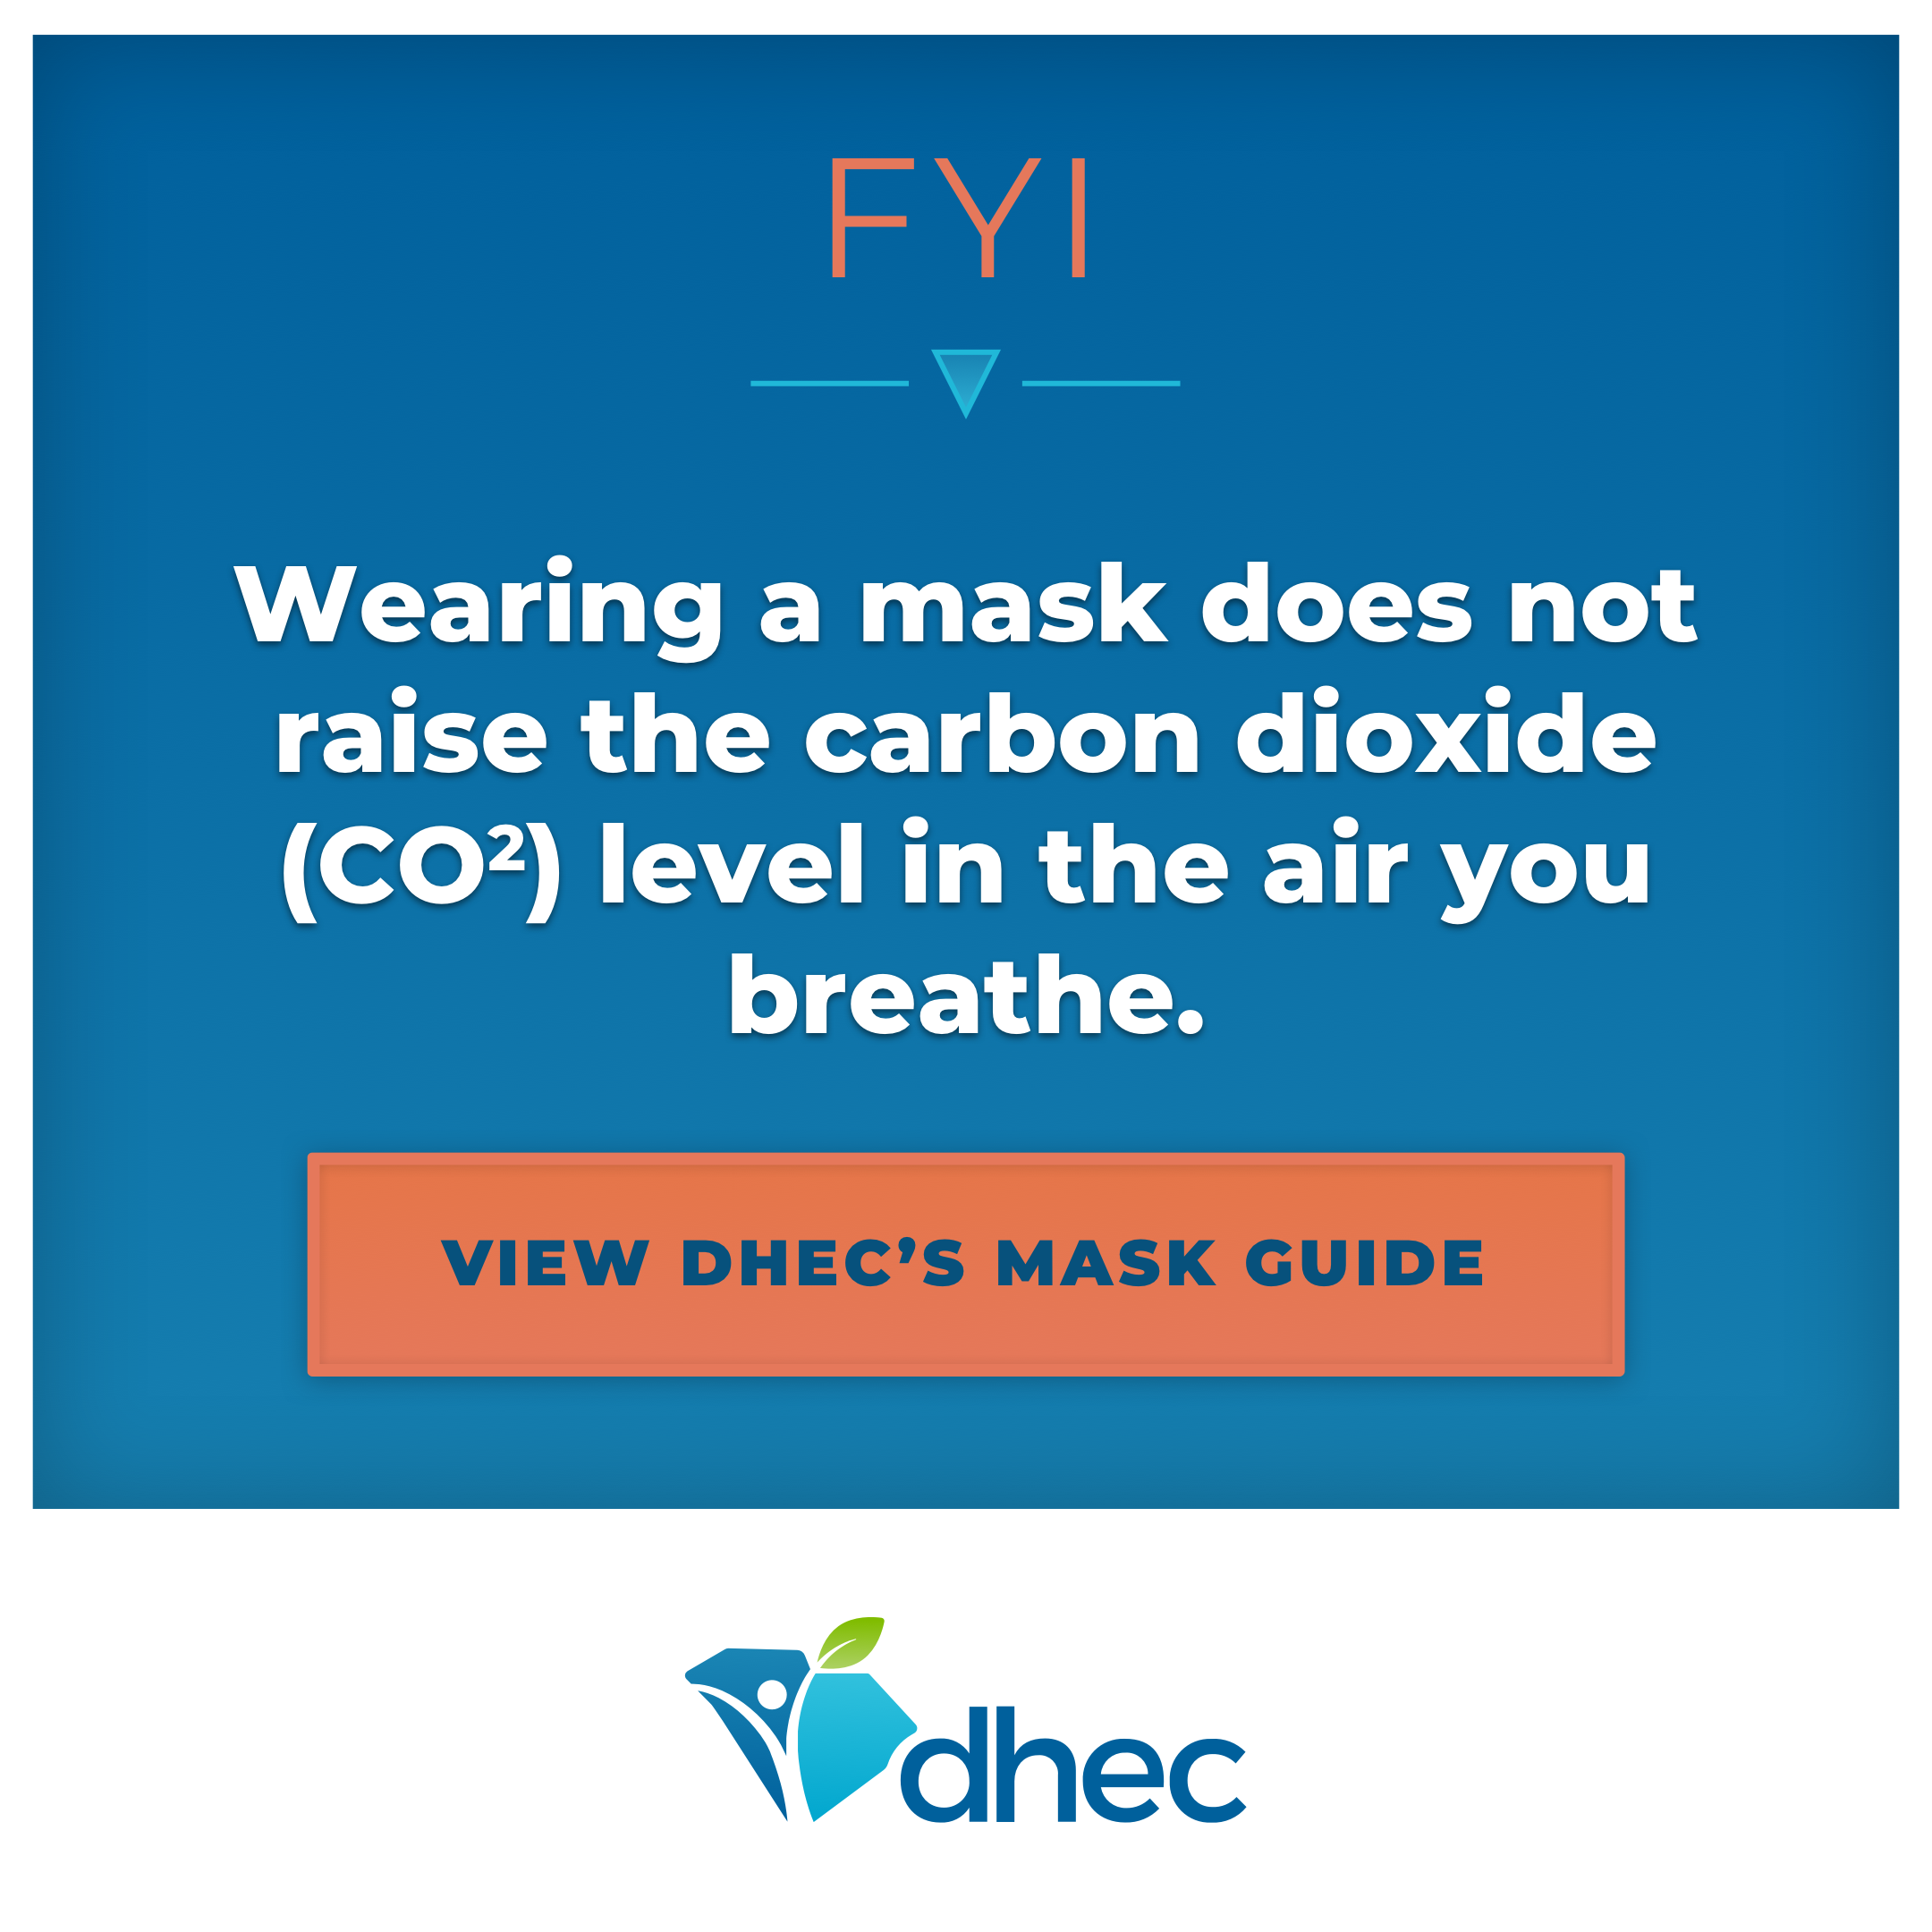 Wearing a mask does not increase the level of CO2 you breathe.